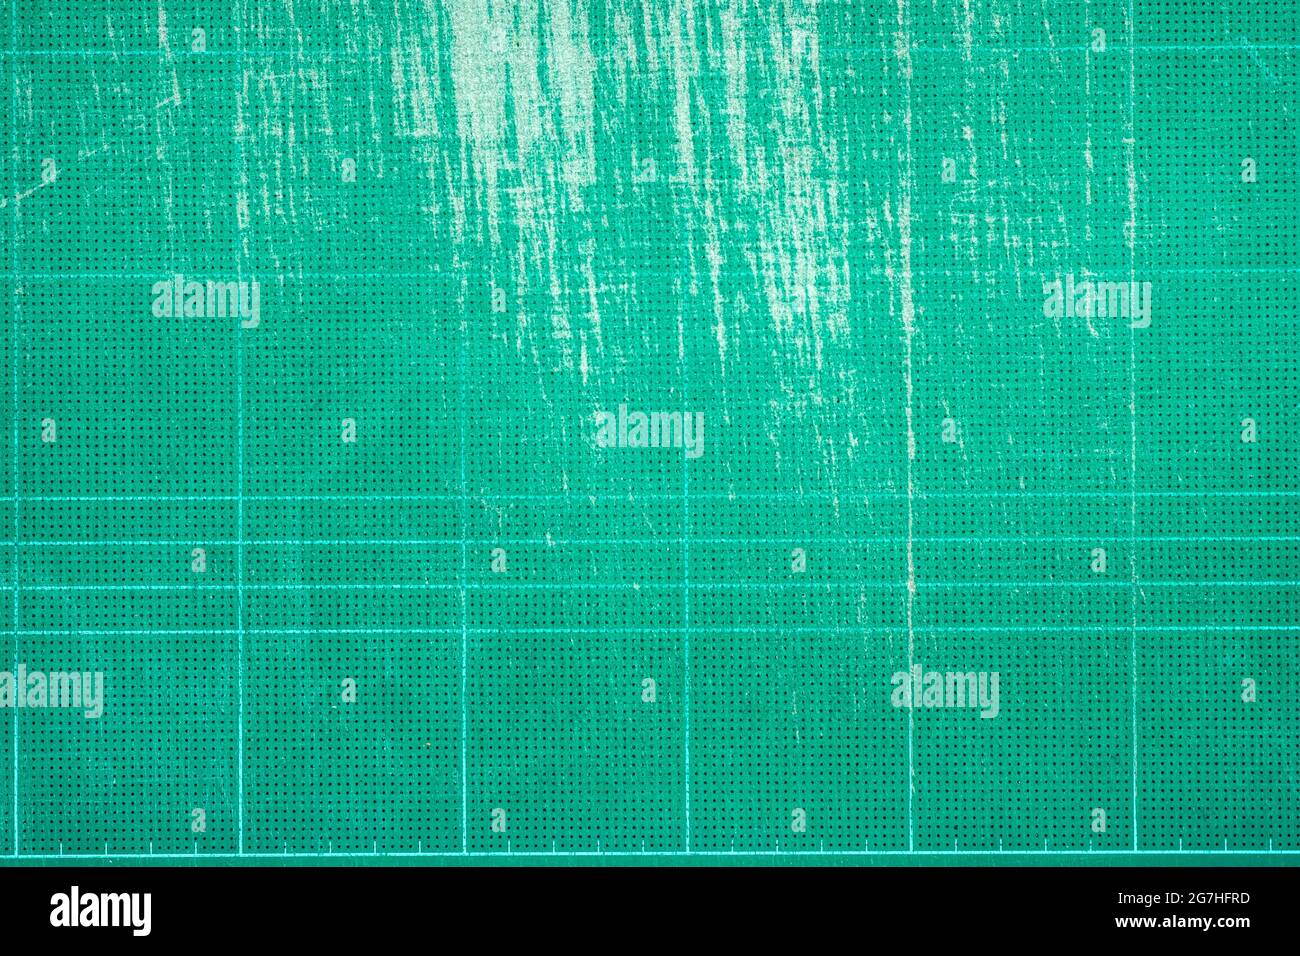 Top view of old green dirty cutting mat, grunge texture background, copy  space for text and graphic Stock Photo - Alamy